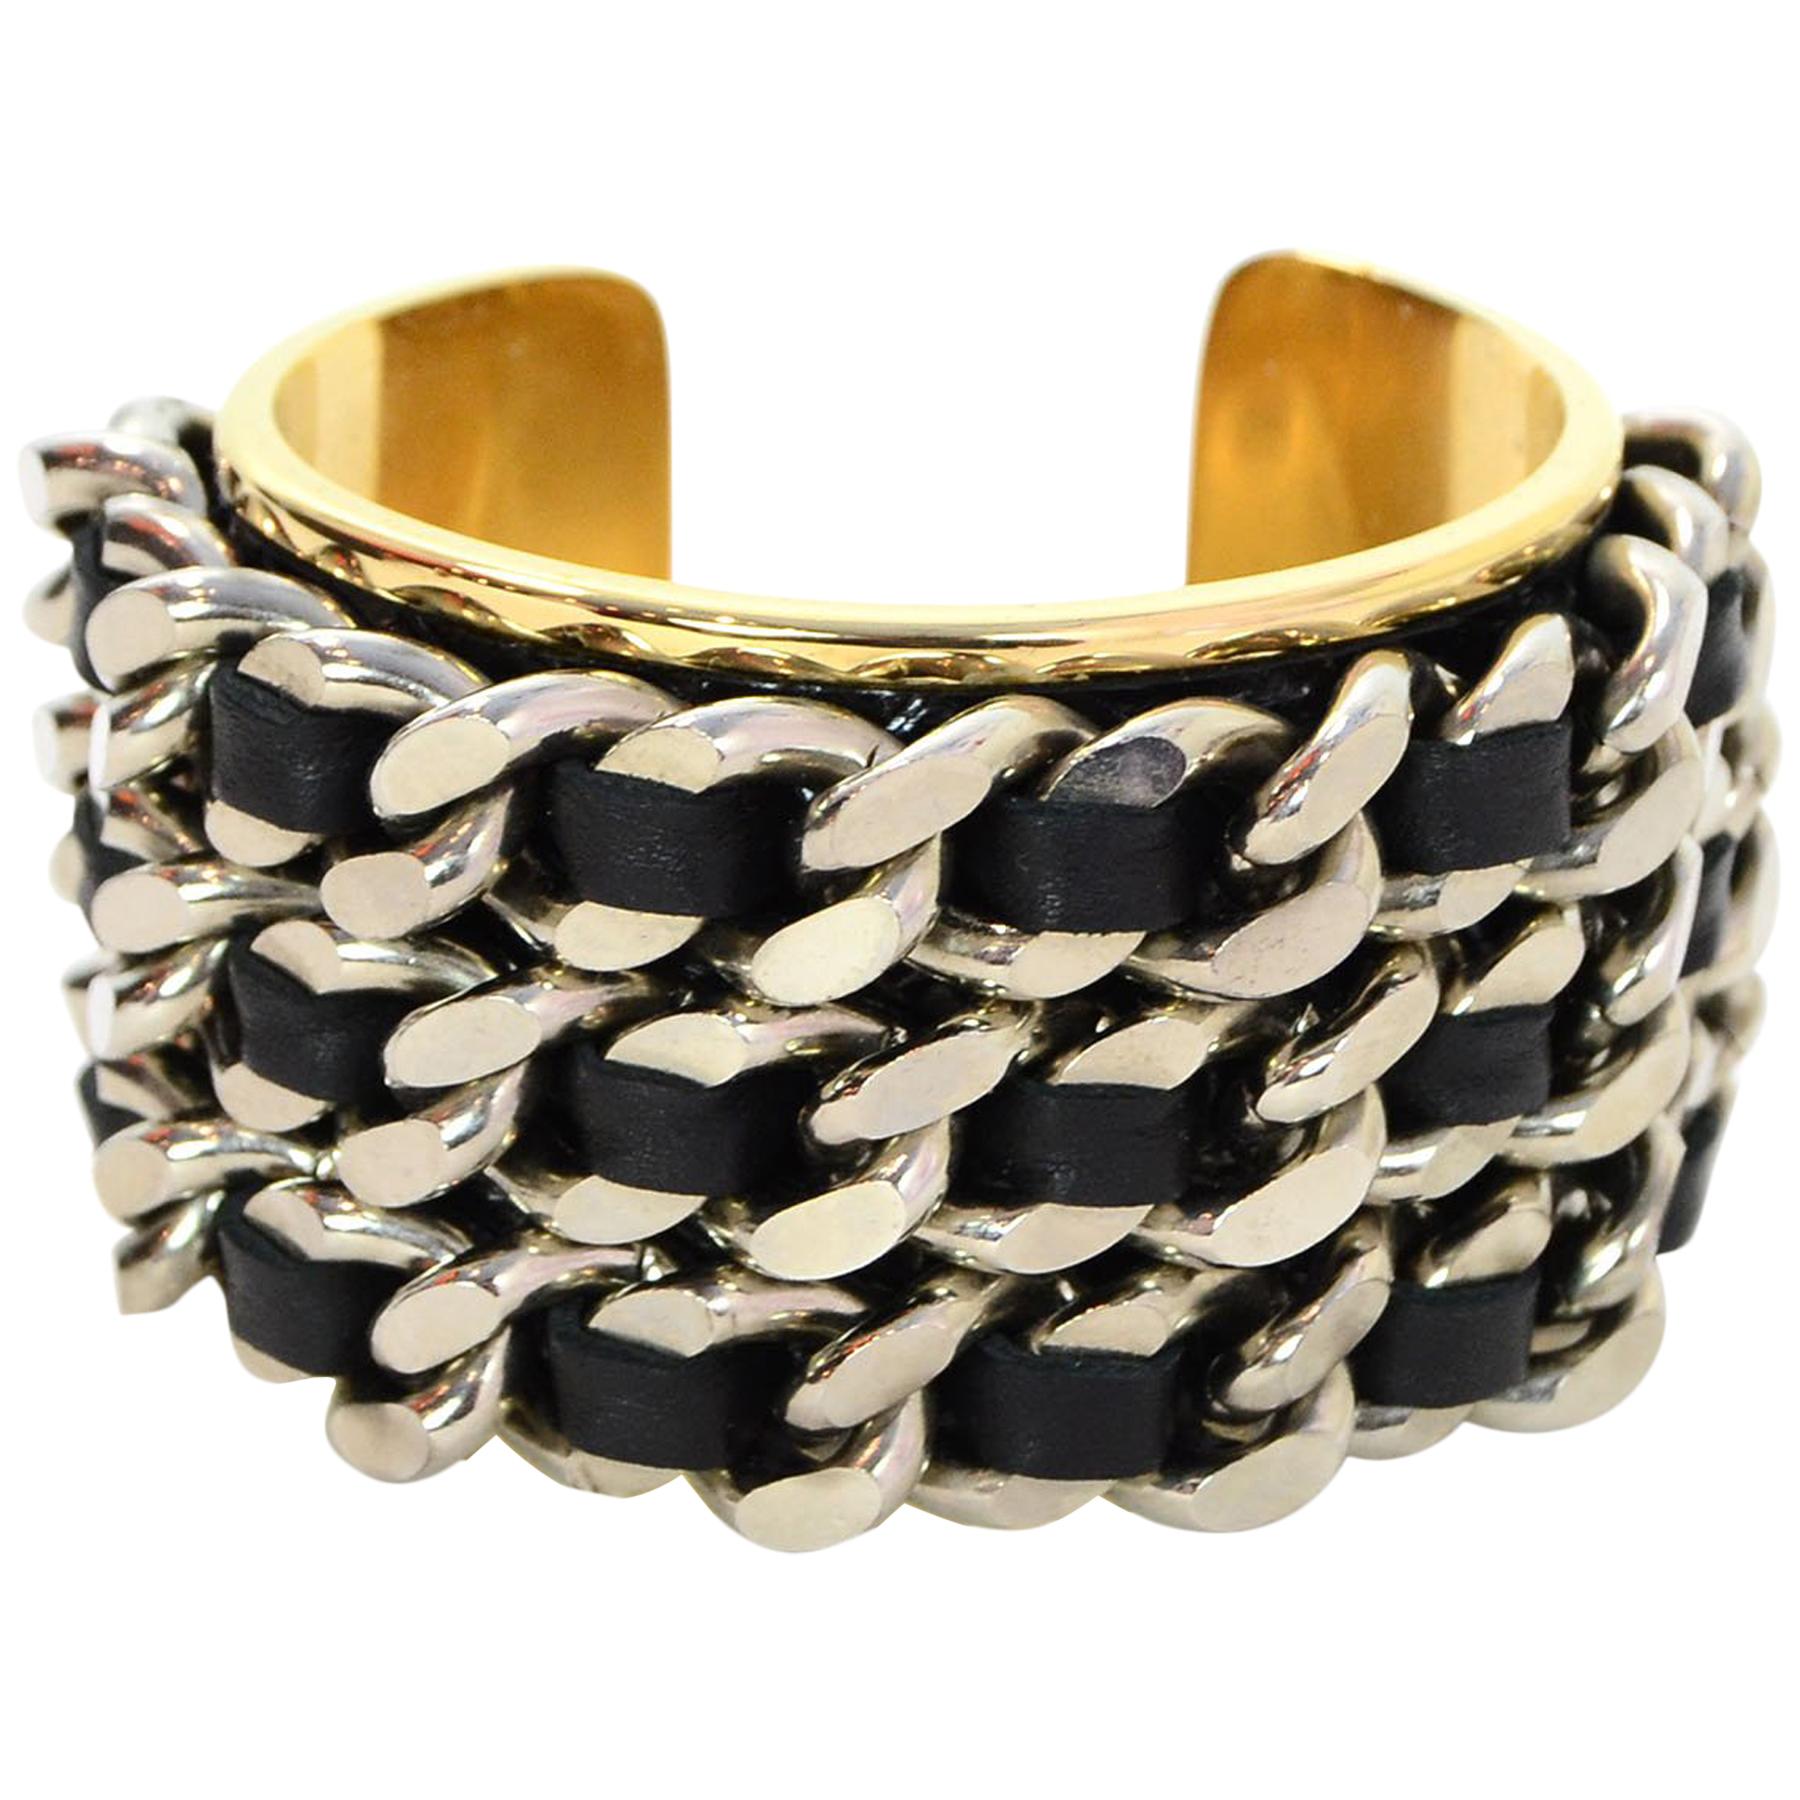 Stamerra Black Leather Chain-Link Cuff Bracelet with Box & Dust Bag